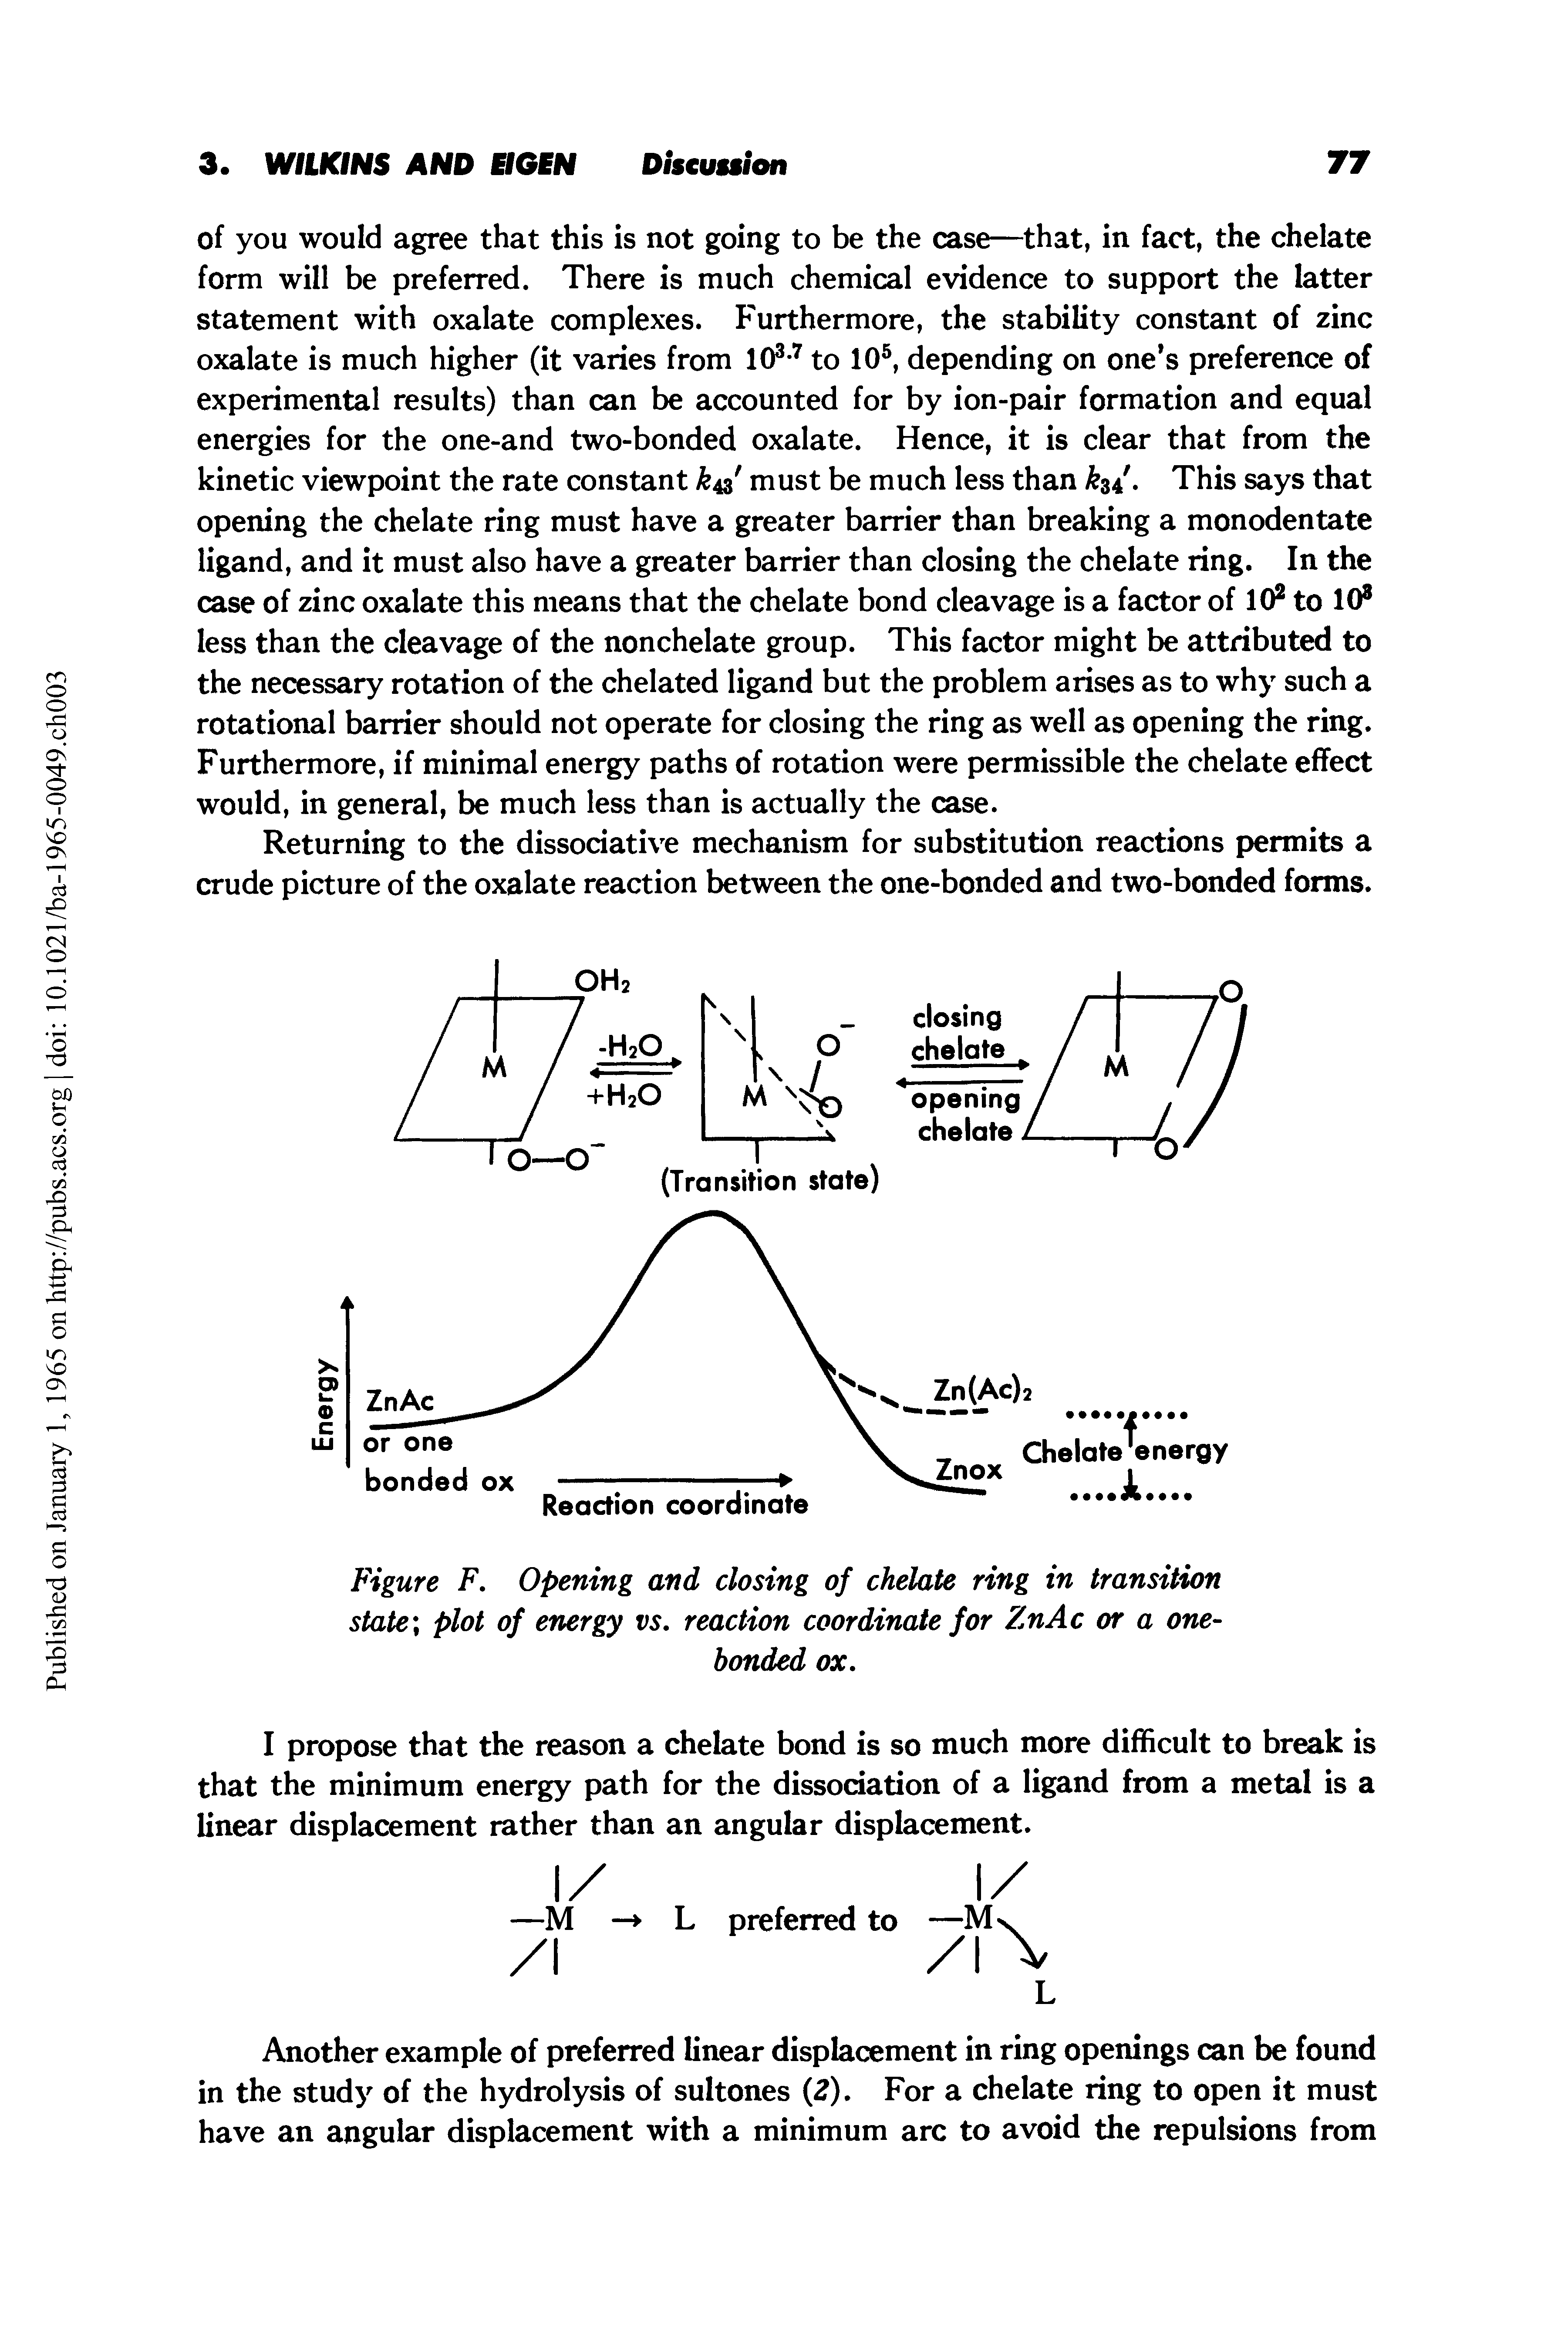 Figure F. Opening and closing of chelate ring in transition state plot of energy vs. reaction coordinate for ZnAc or a one-bonded ox.